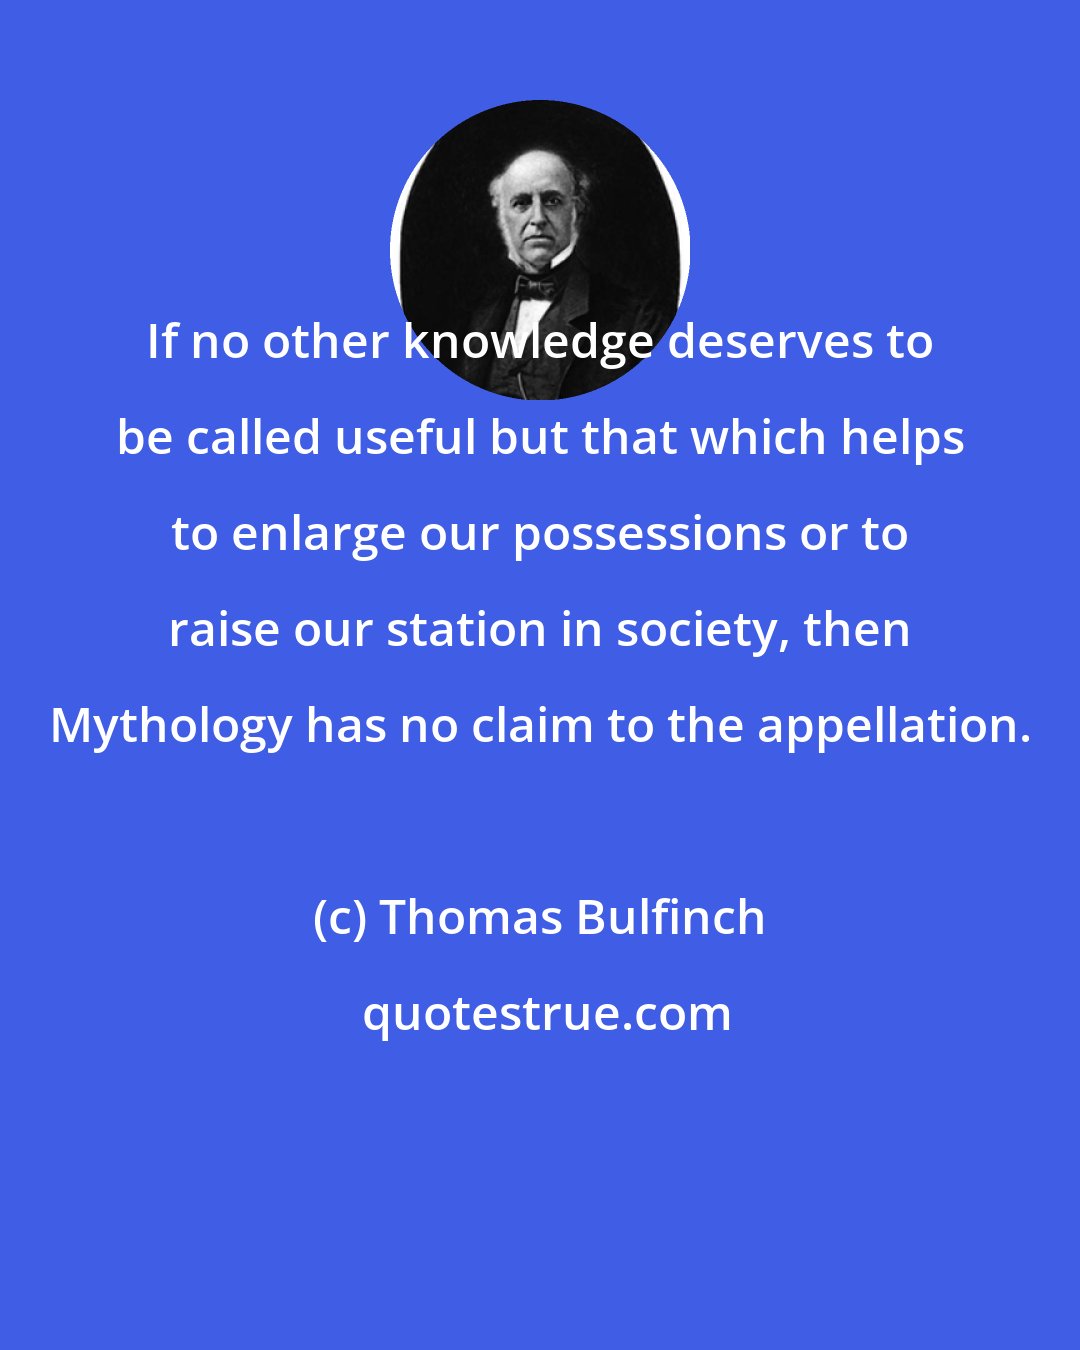 Thomas Bulfinch: If no other knowledge deserves to be called useful but that which helps to enlarge our possessions or to raise our station in society, then Mythology has no claim to the appellation.